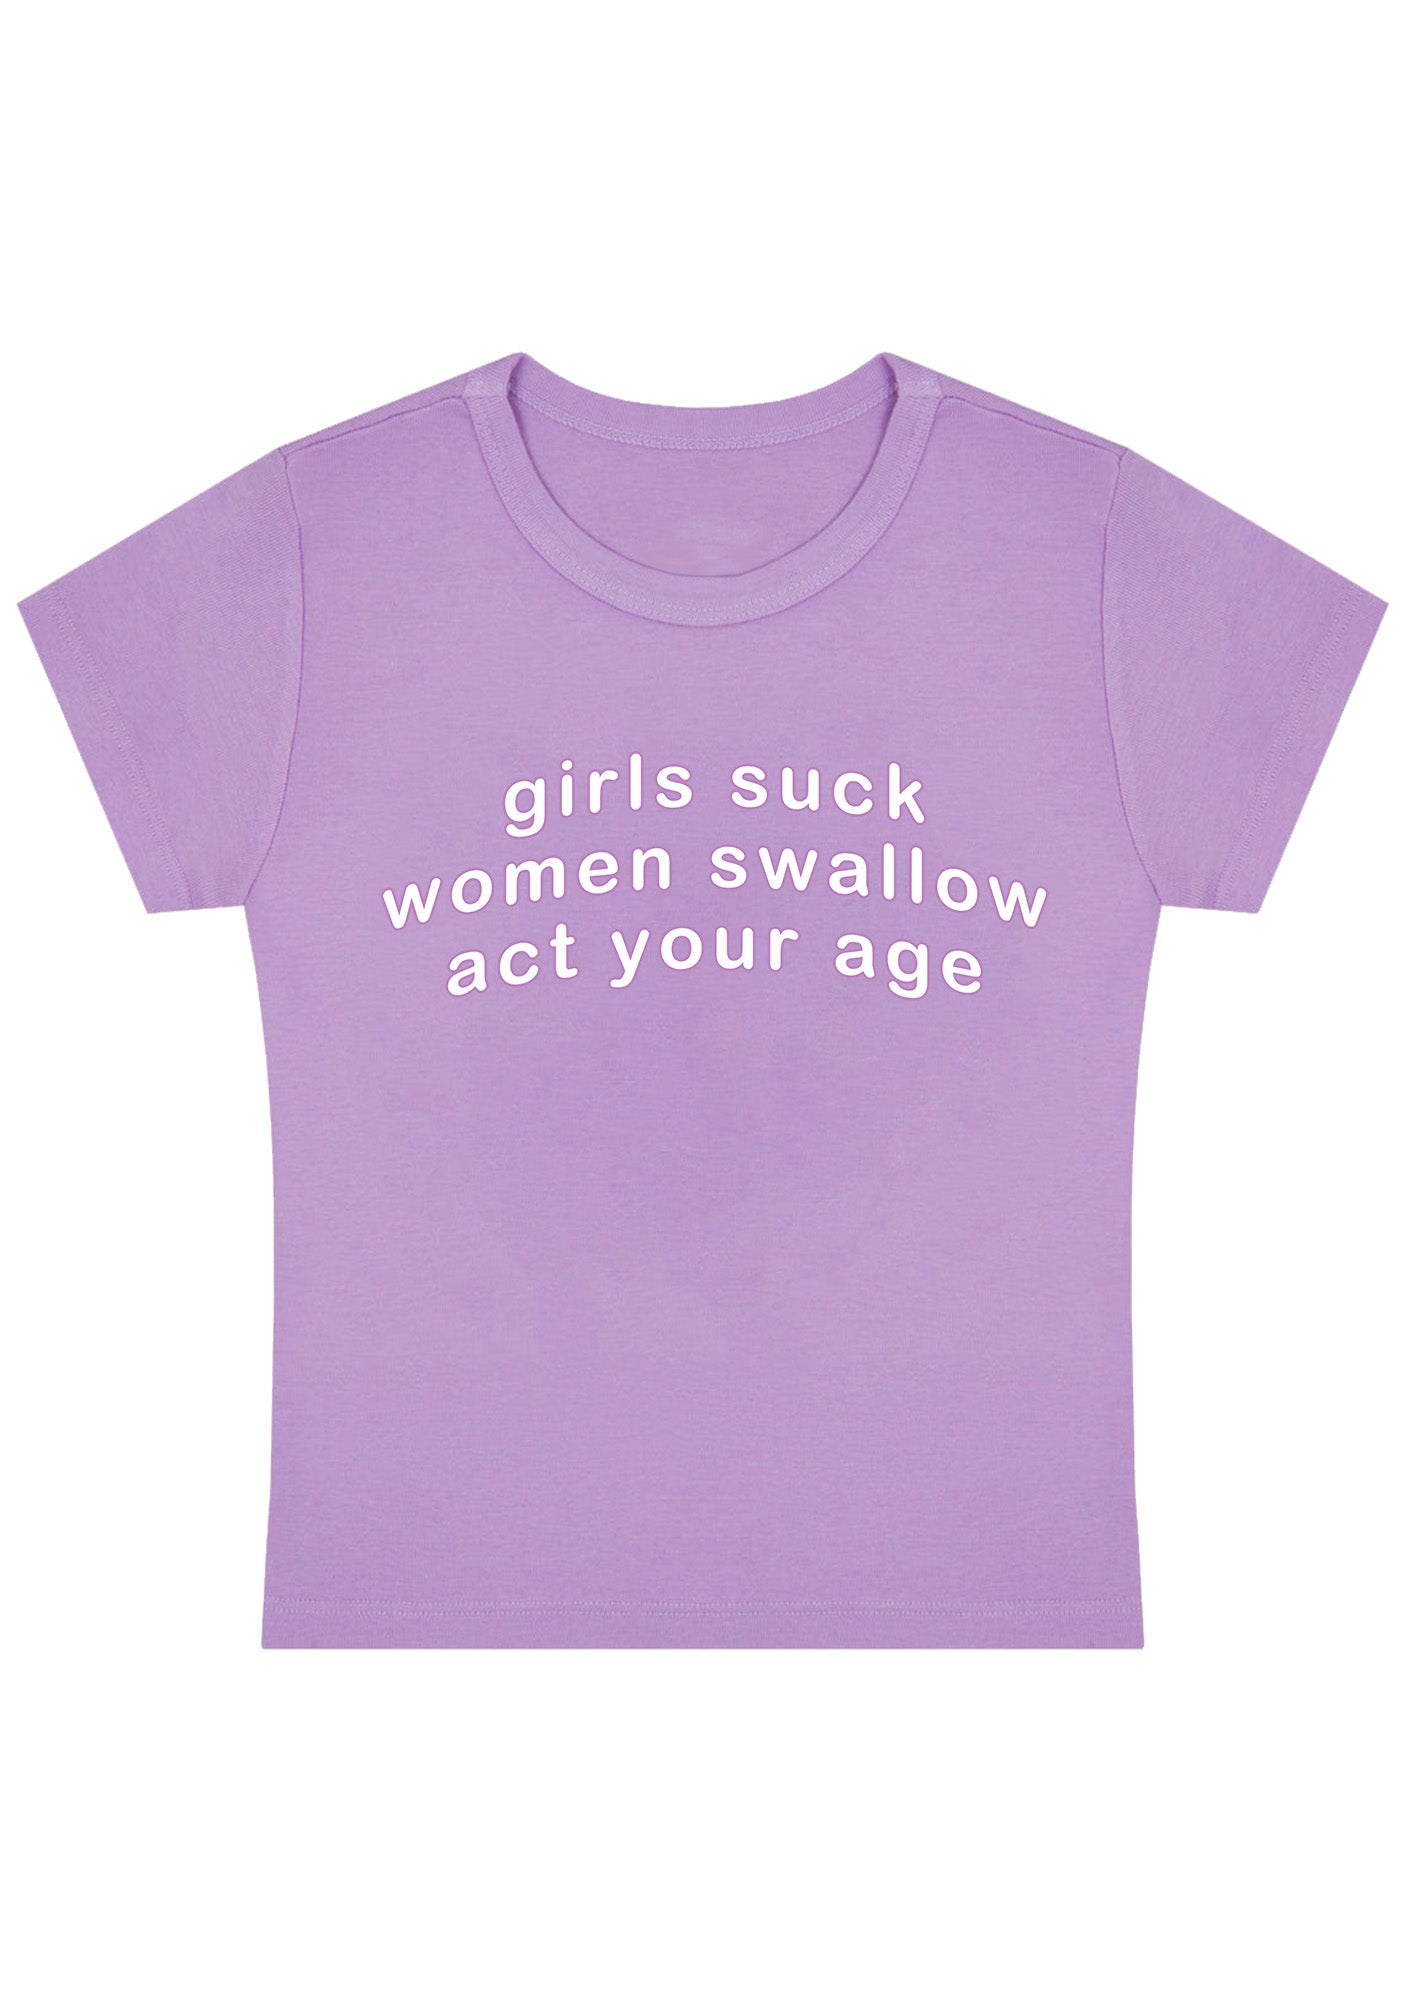 Curvy Women Swallow Act Your Age Baby Tee